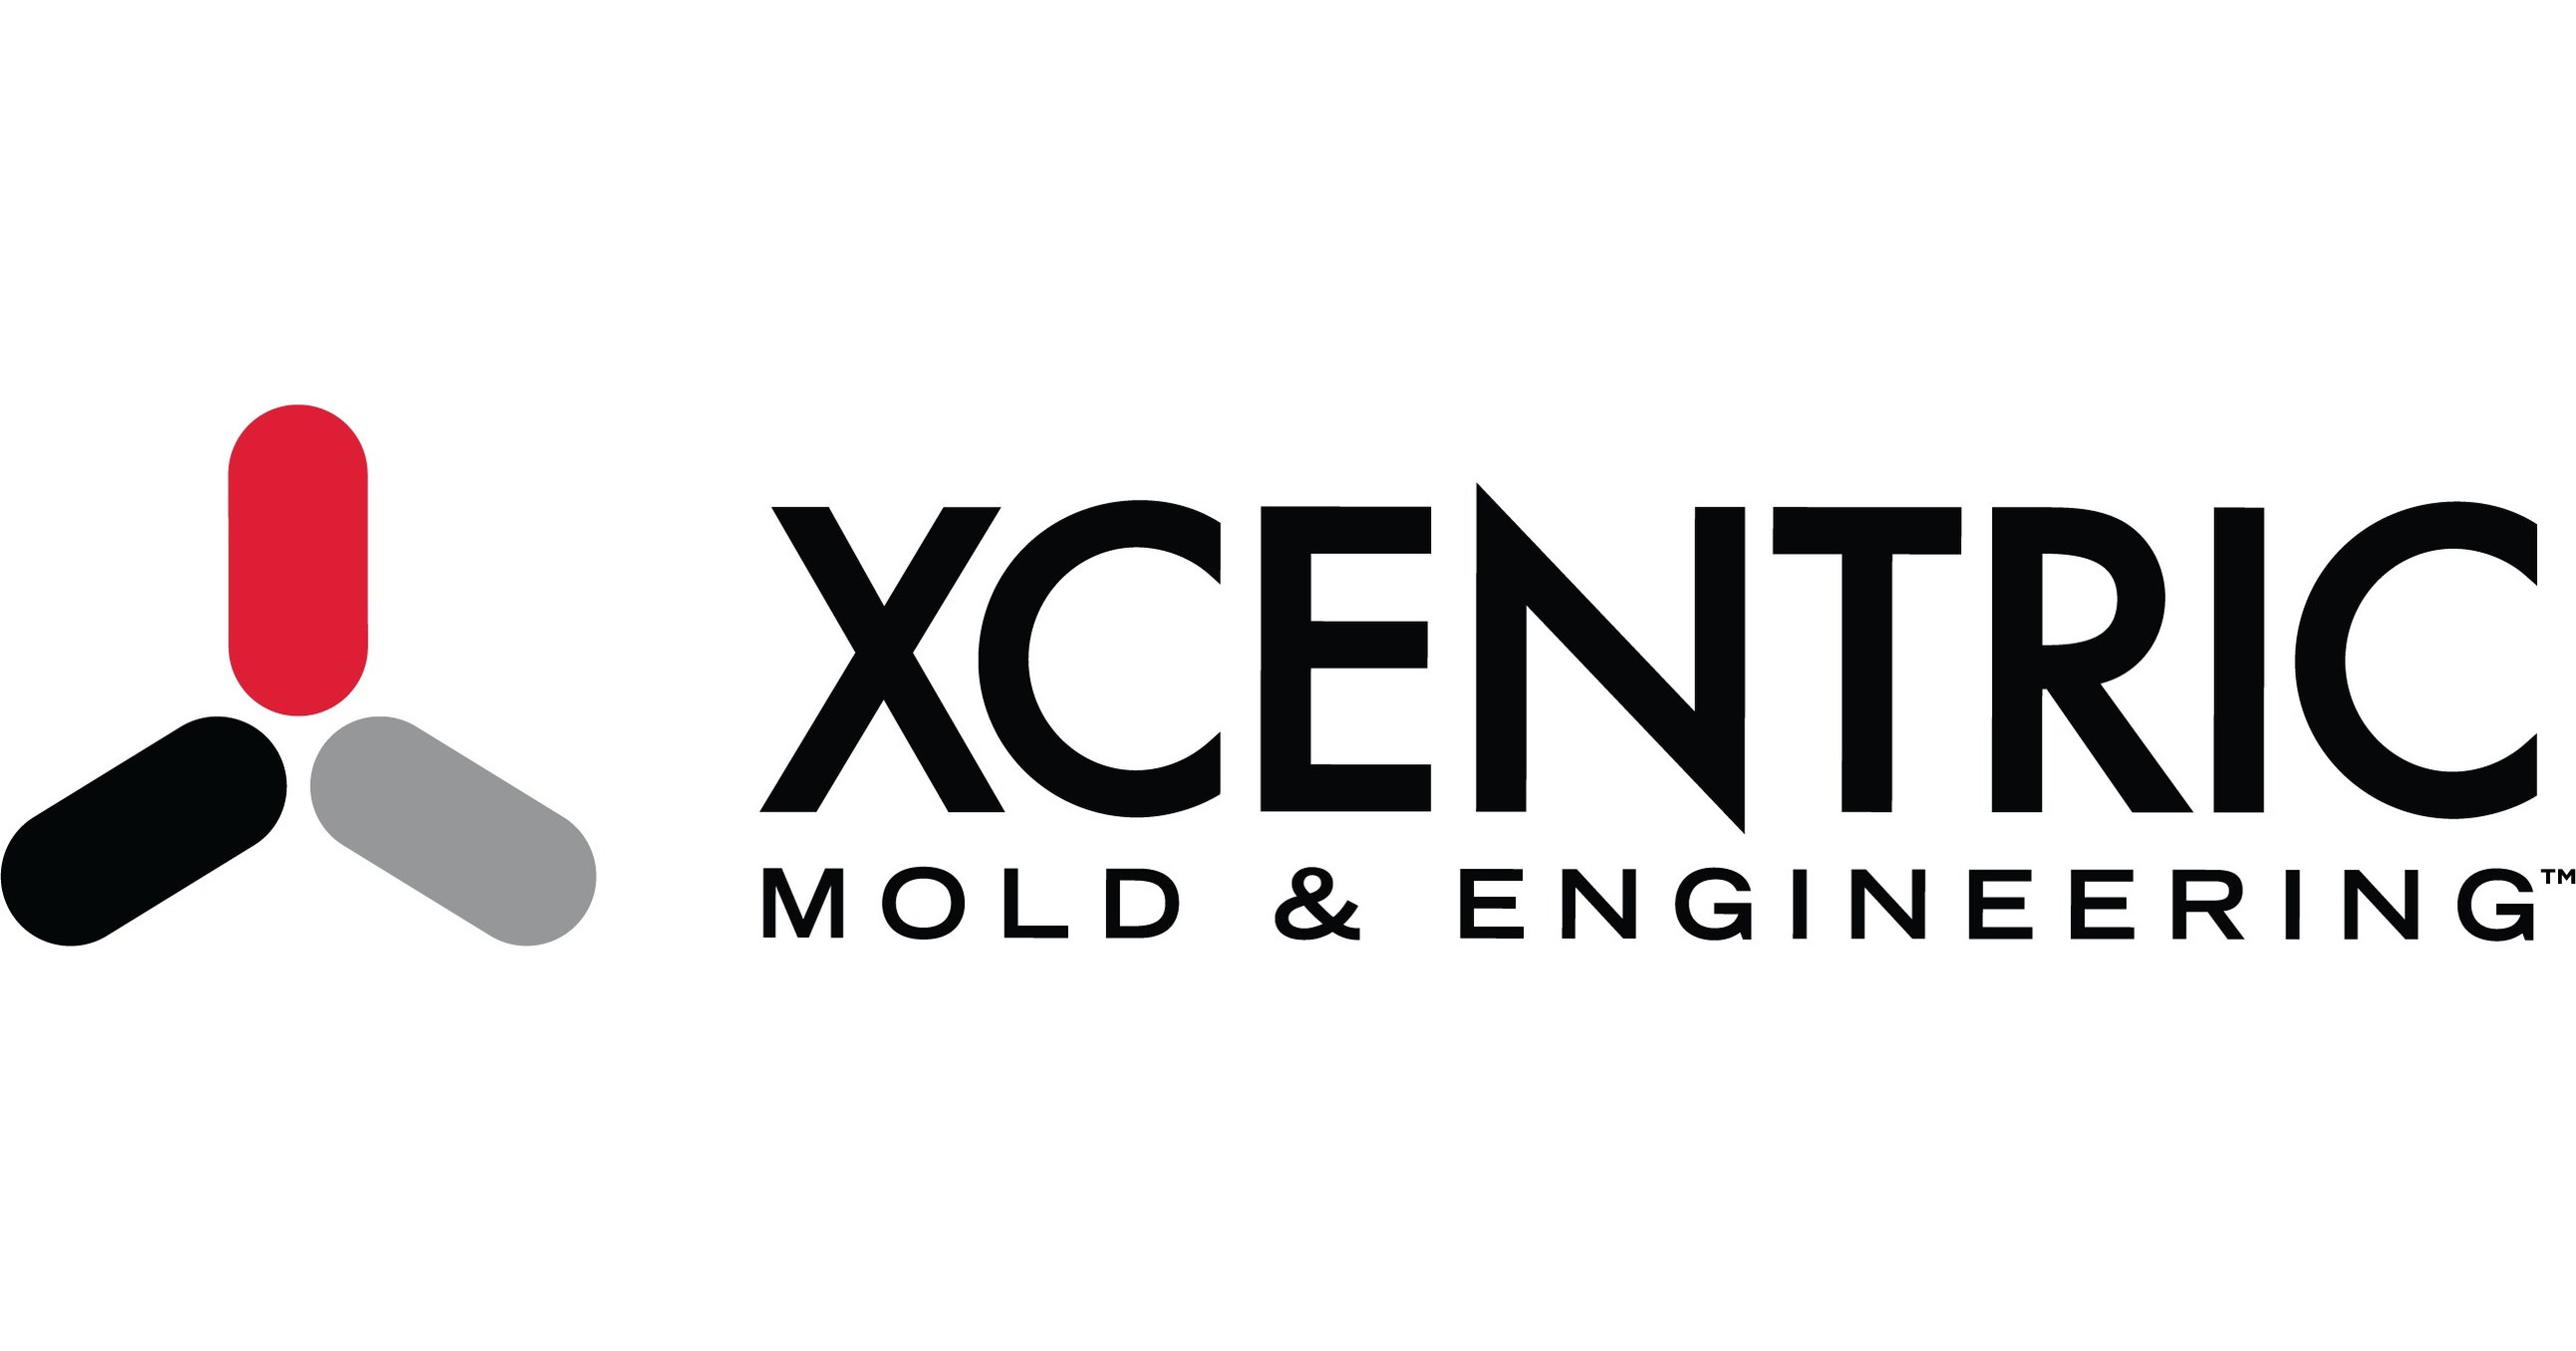 Xcentric Mold & Engineering announces strategic partnership with Stratasys Direct Manufacturing